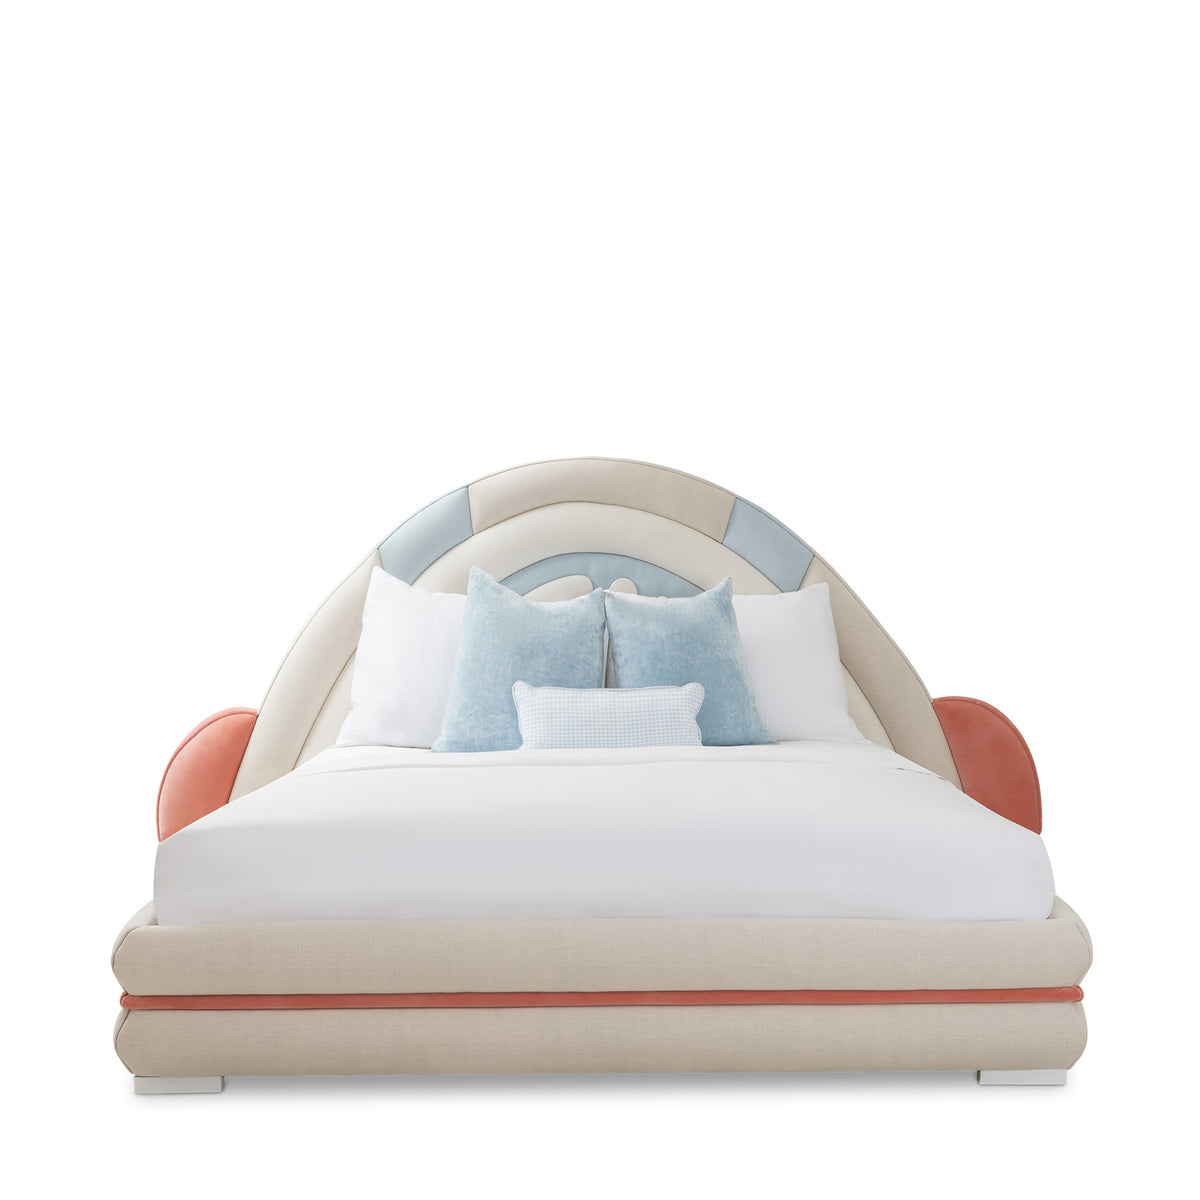 ASTRONAUT BED US TWIN SIZE